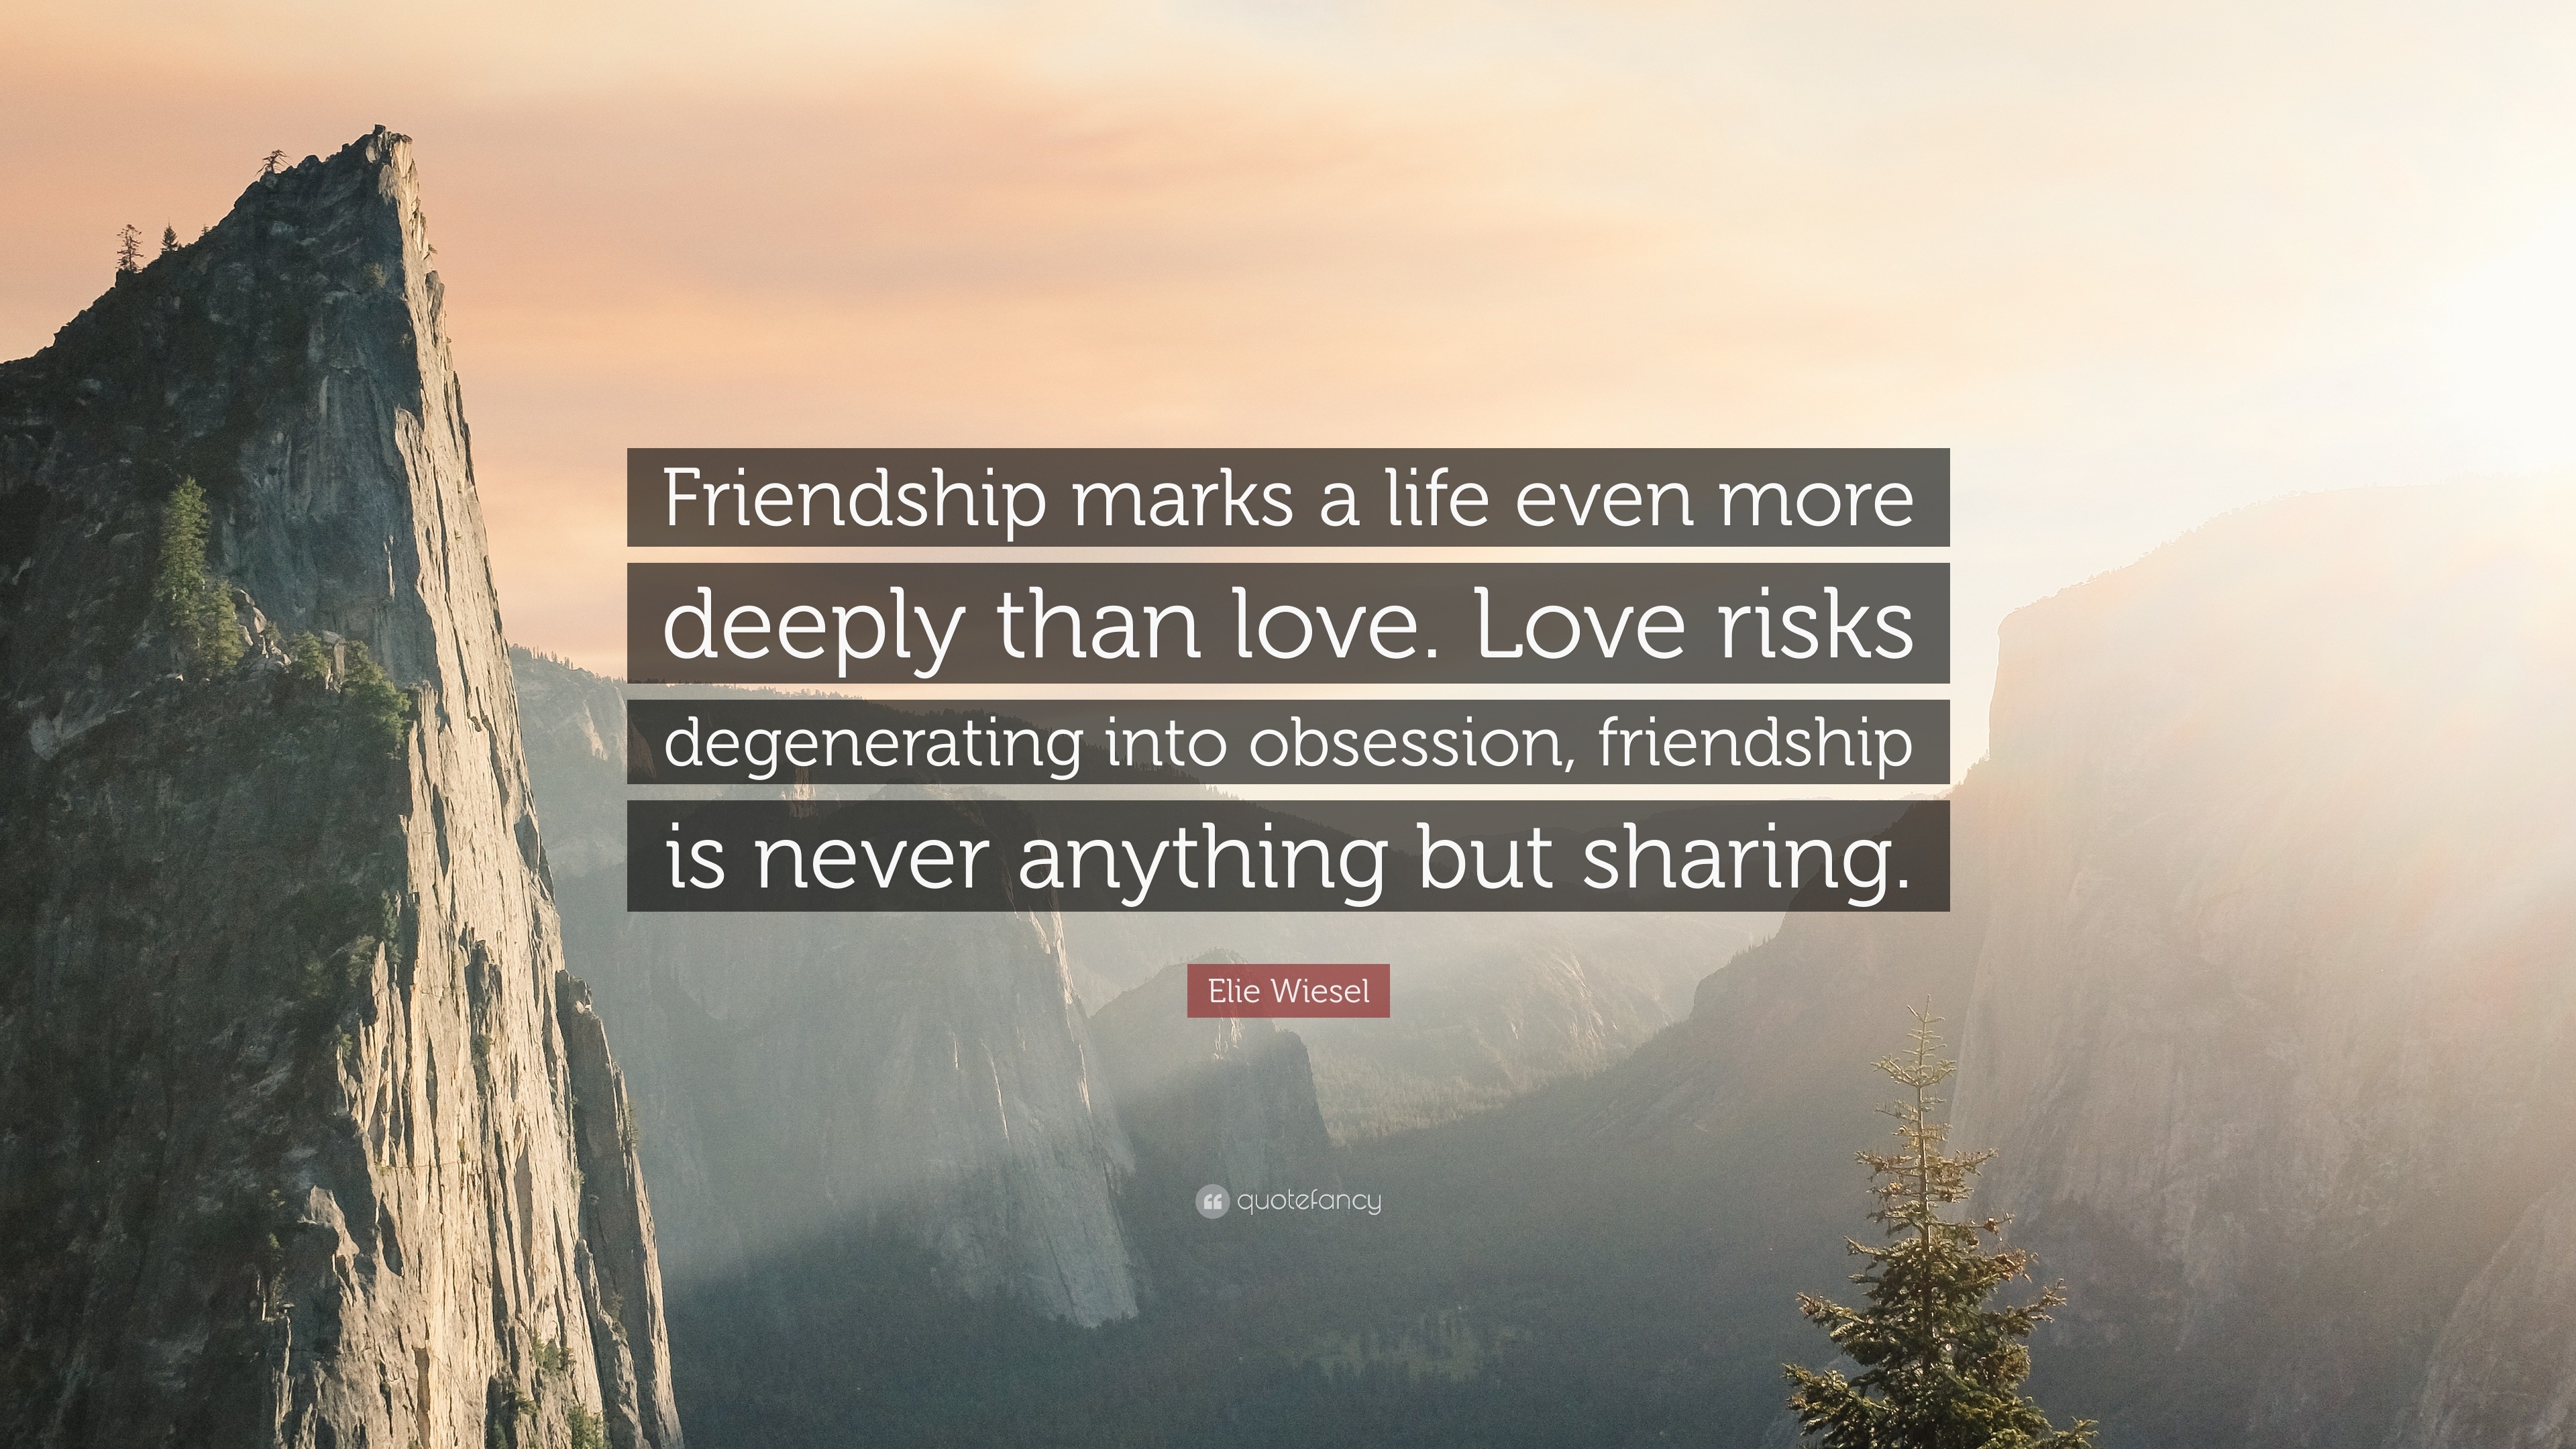 Elie Wiesel Quote “Friendship marks a life even more deeply than love Love